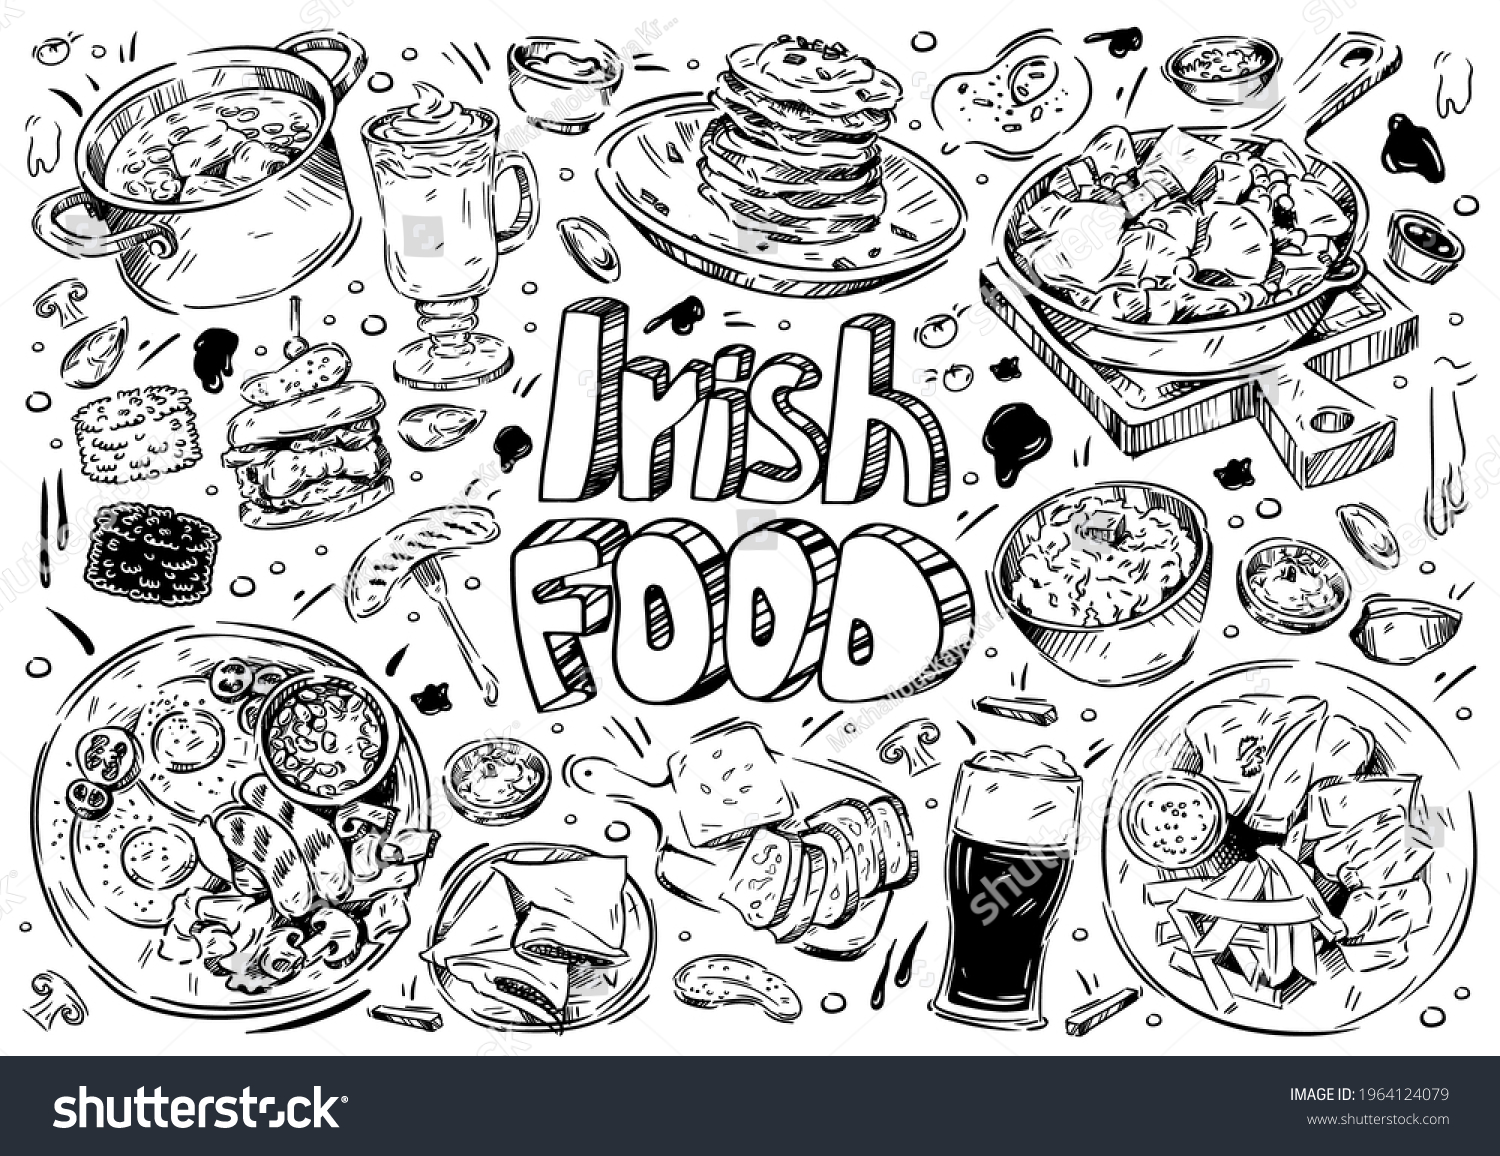 SVG of Hand drawn vector illustration. Doodle Irish food: colcannon, potatoes, boxty, dexter beef, grill meat, wurst, beer, coffee, bacon, bread svg